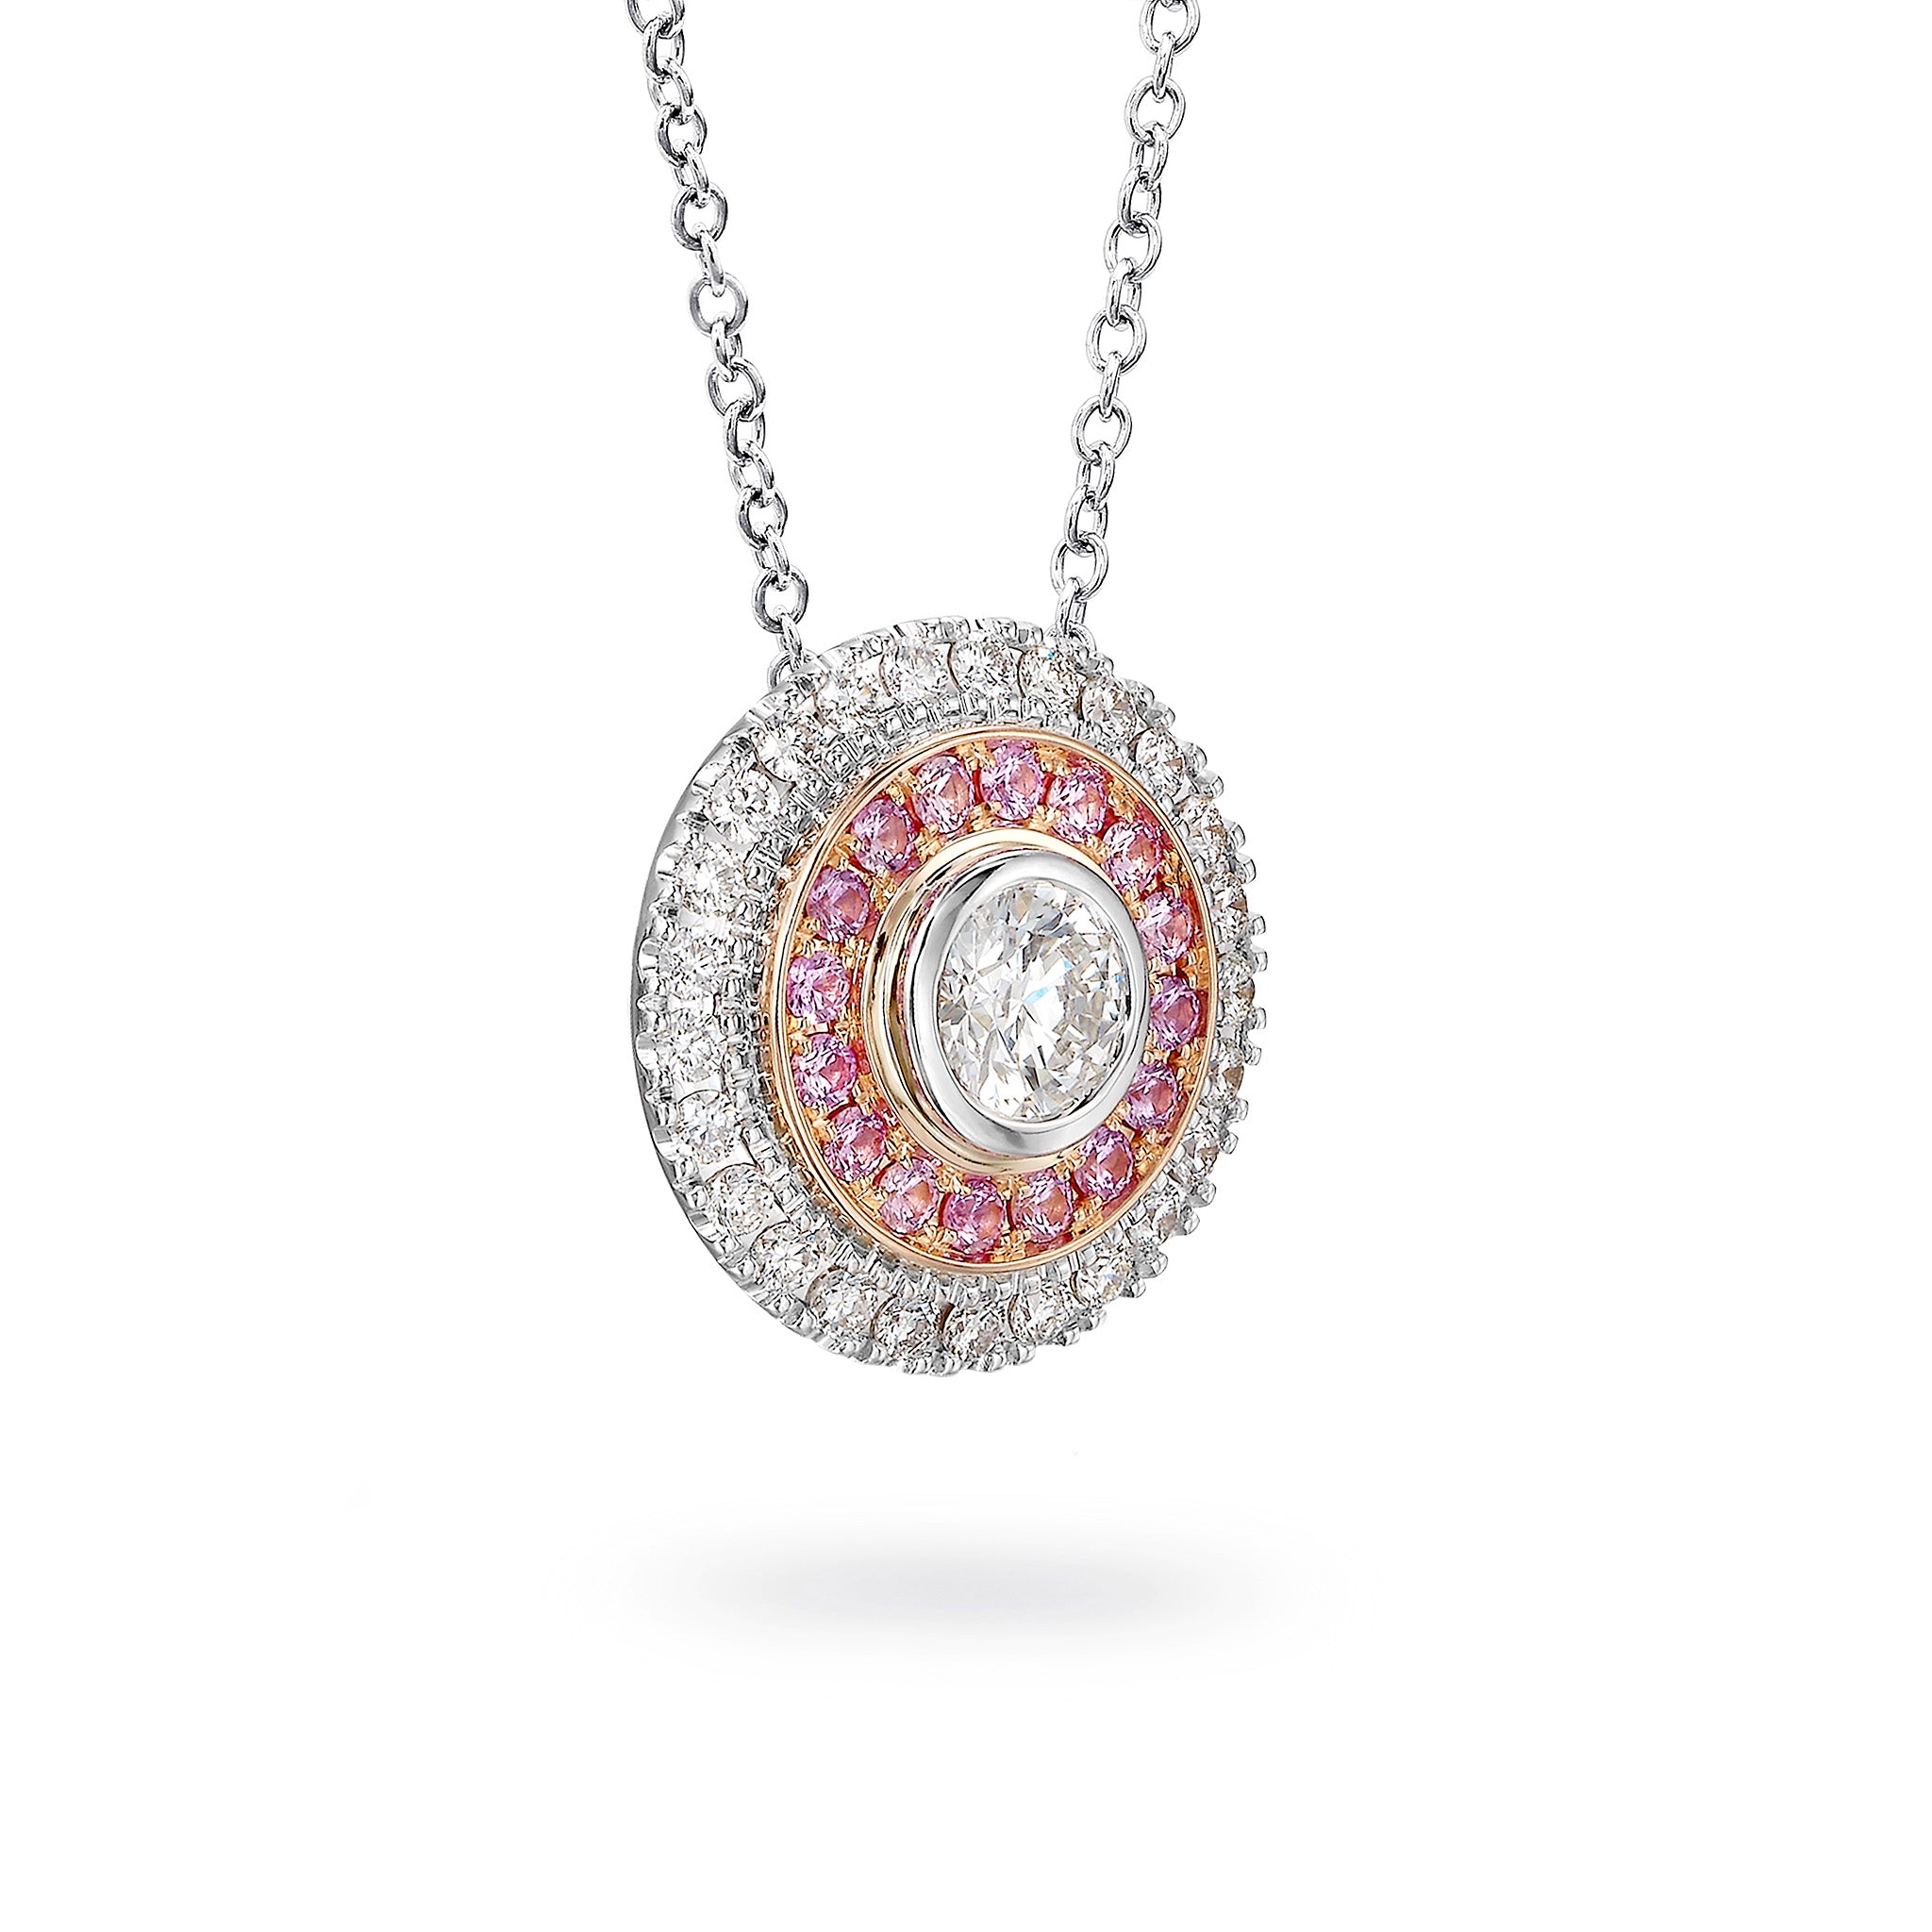 Shimansky - Diamond and Sapphire Double Microset Halo Pendant crafted in 18K White and Rose Gold